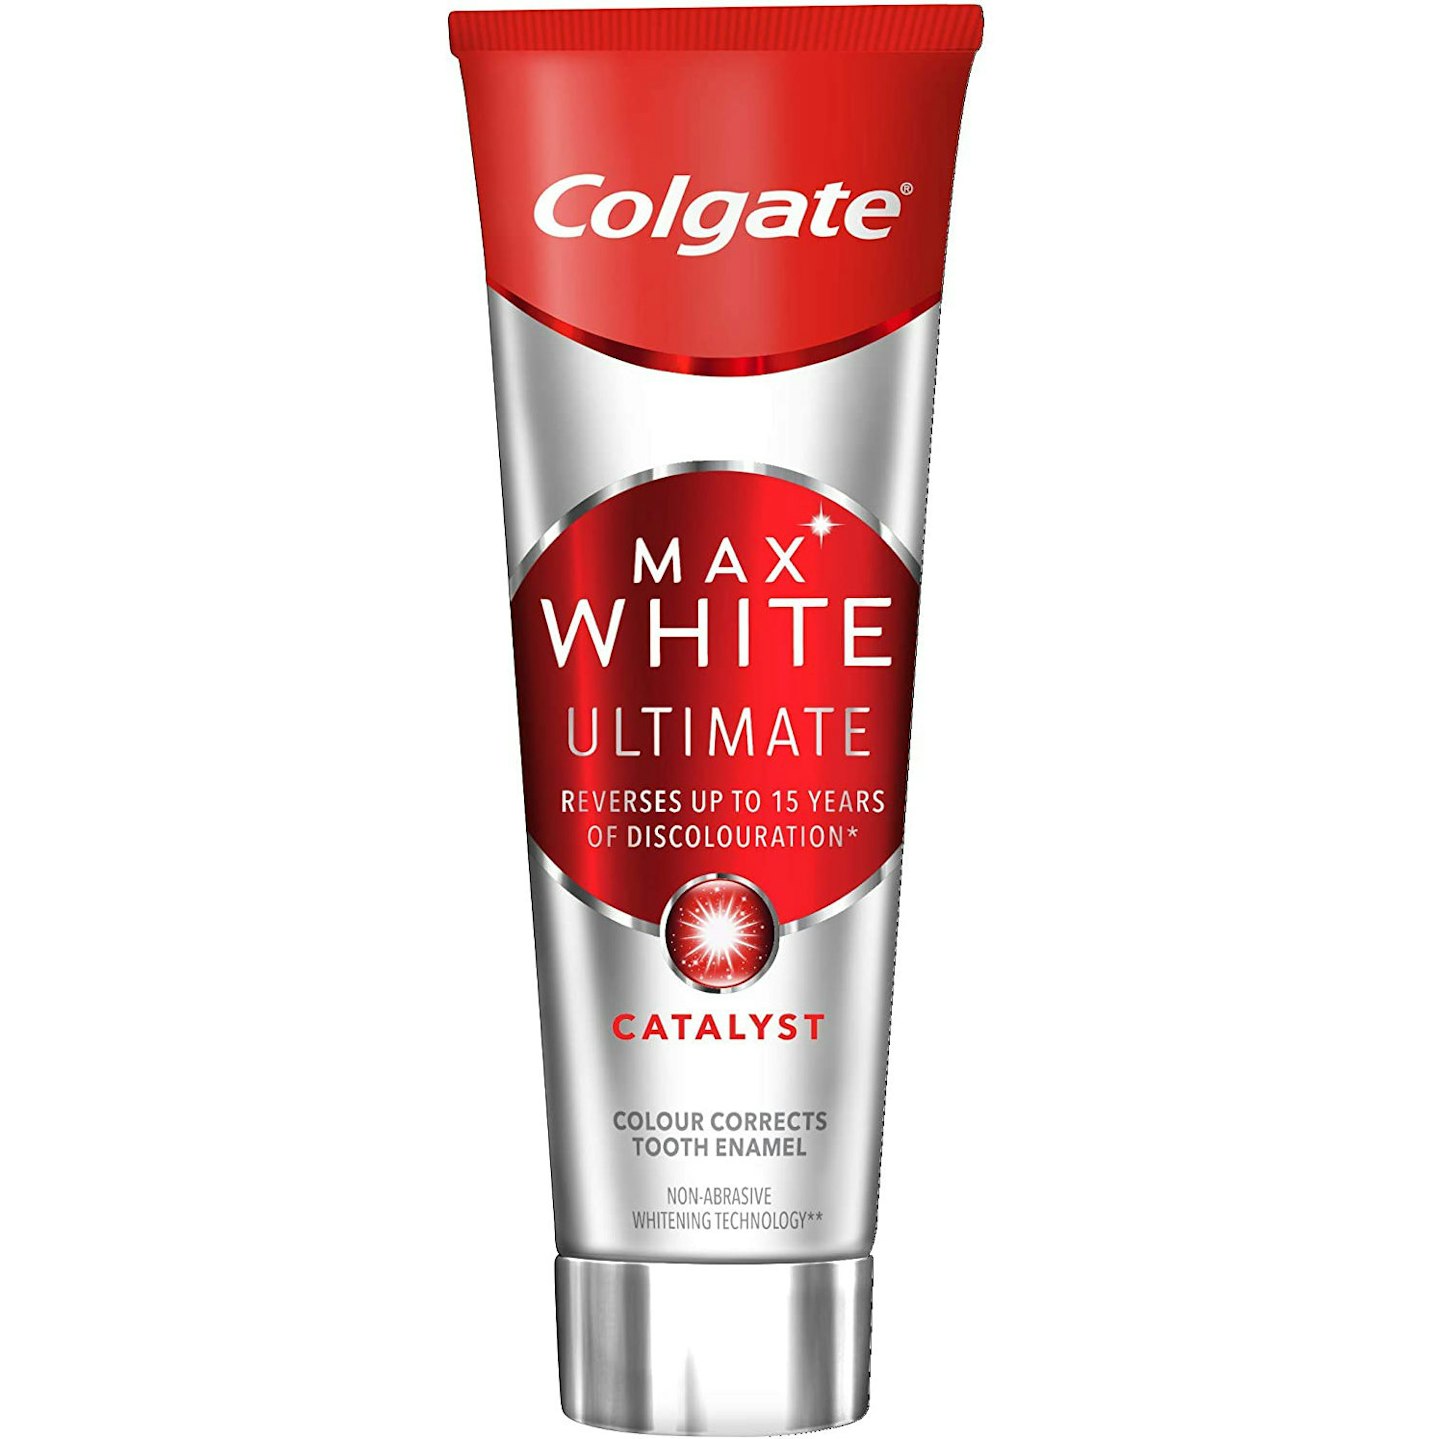 Colgate Max White Ultimate Catalyst Whitening Toothpaste